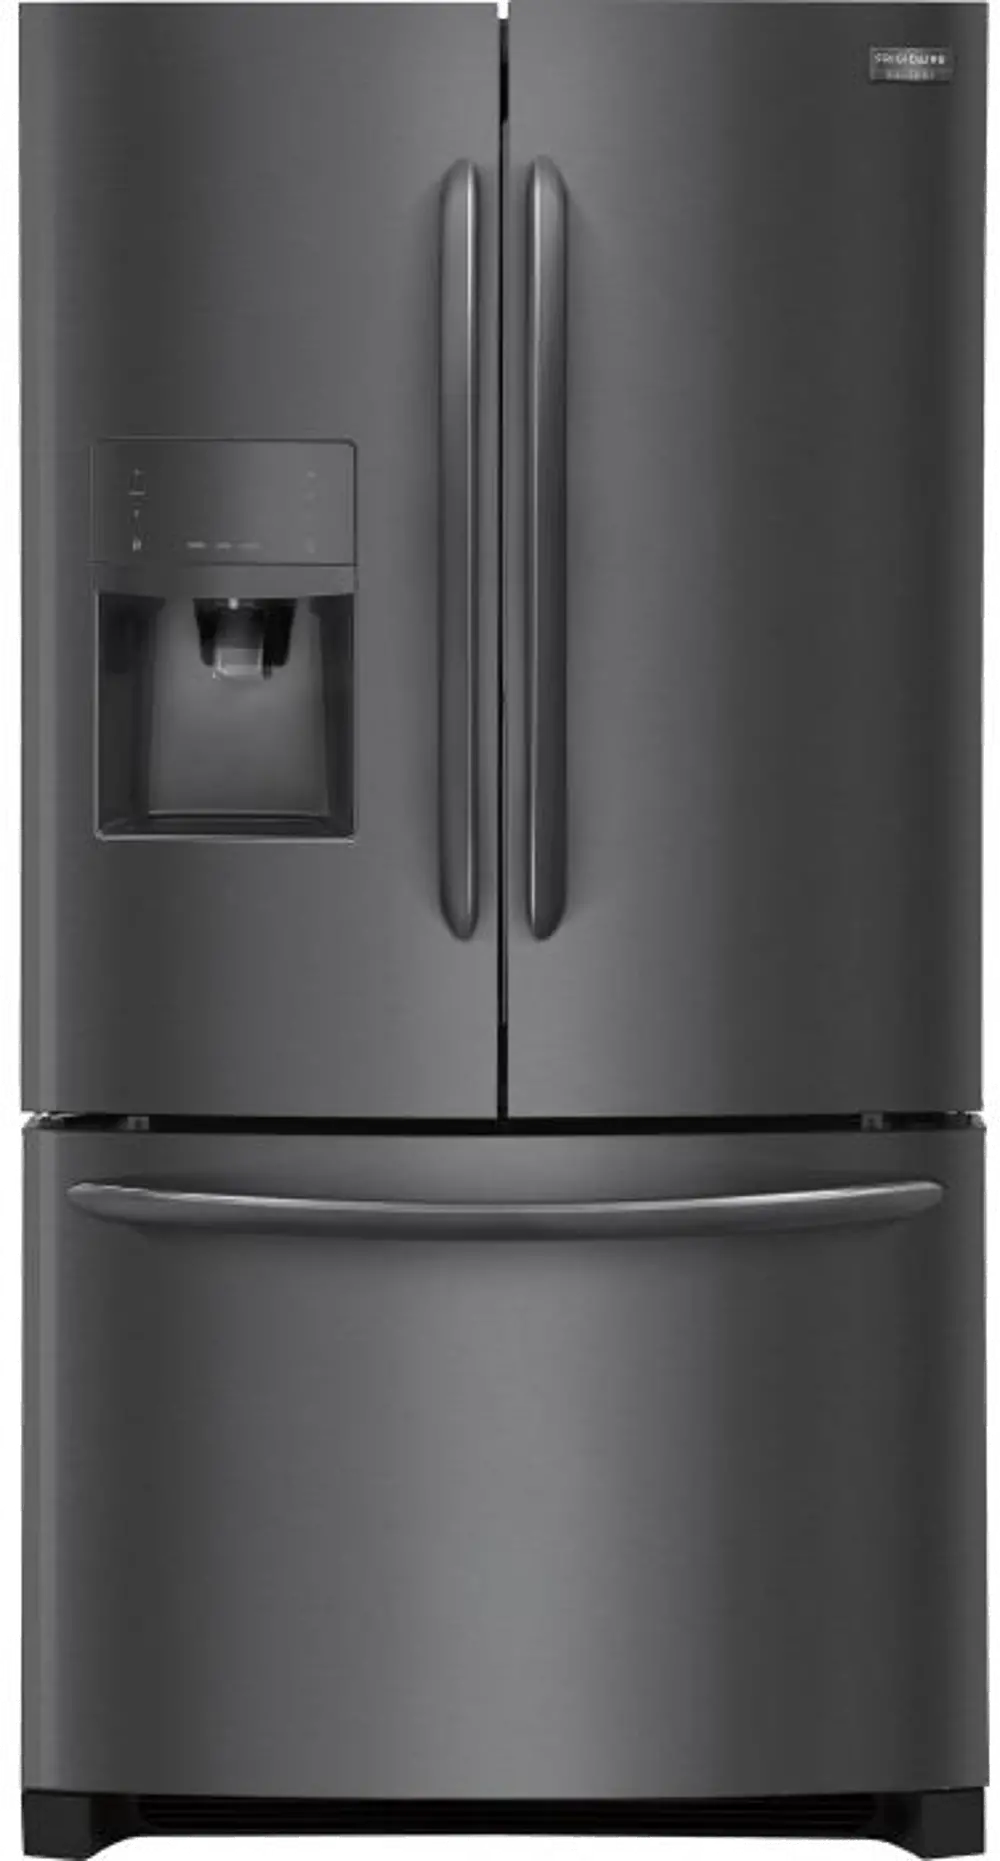 FGHF2367TD Frigidaire French Door Refrigerator - 36 Inch Black Stainless Steel-1